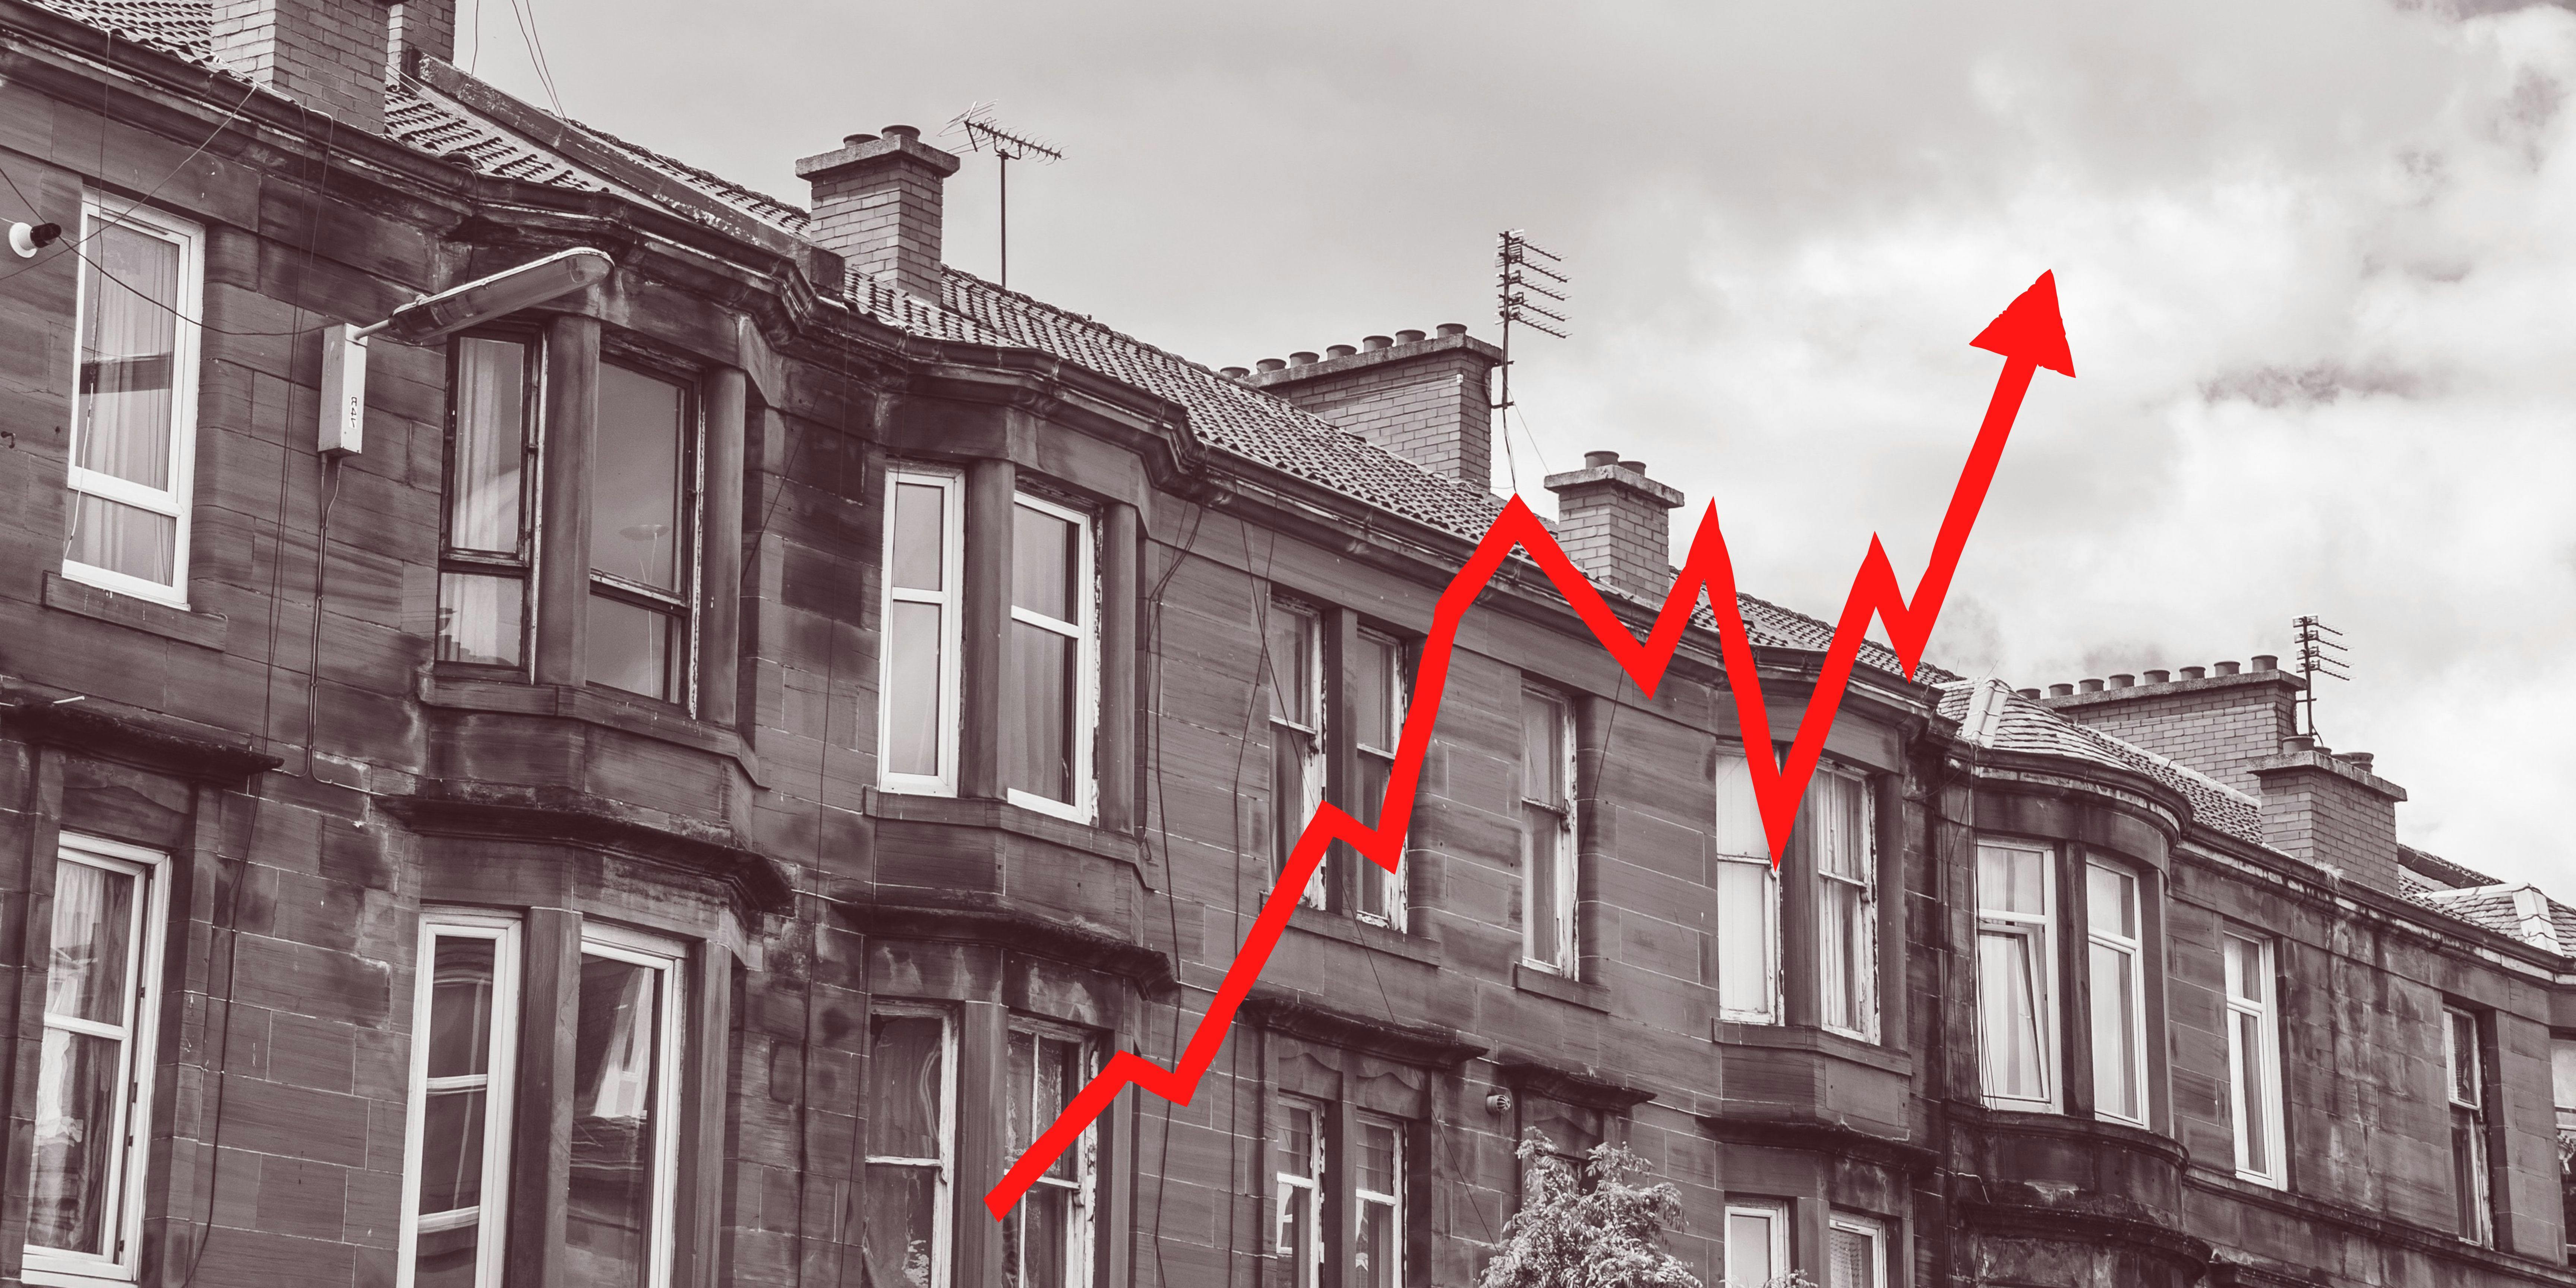 Are house prices still rising?